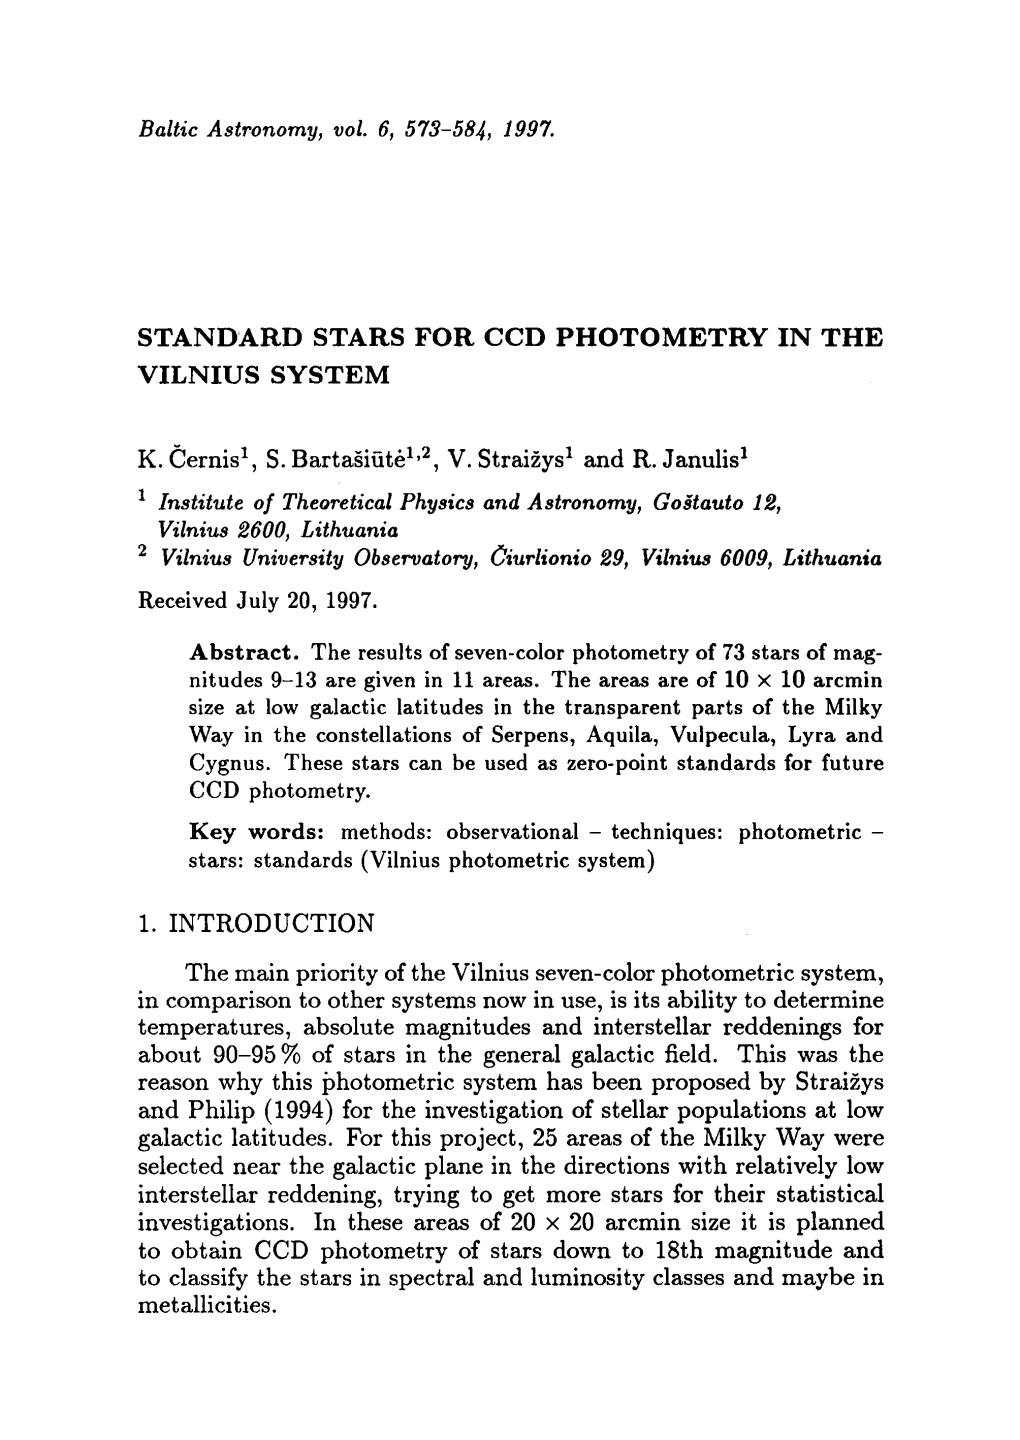 Standard Stars for Ccd Photometry in the Vilnius System